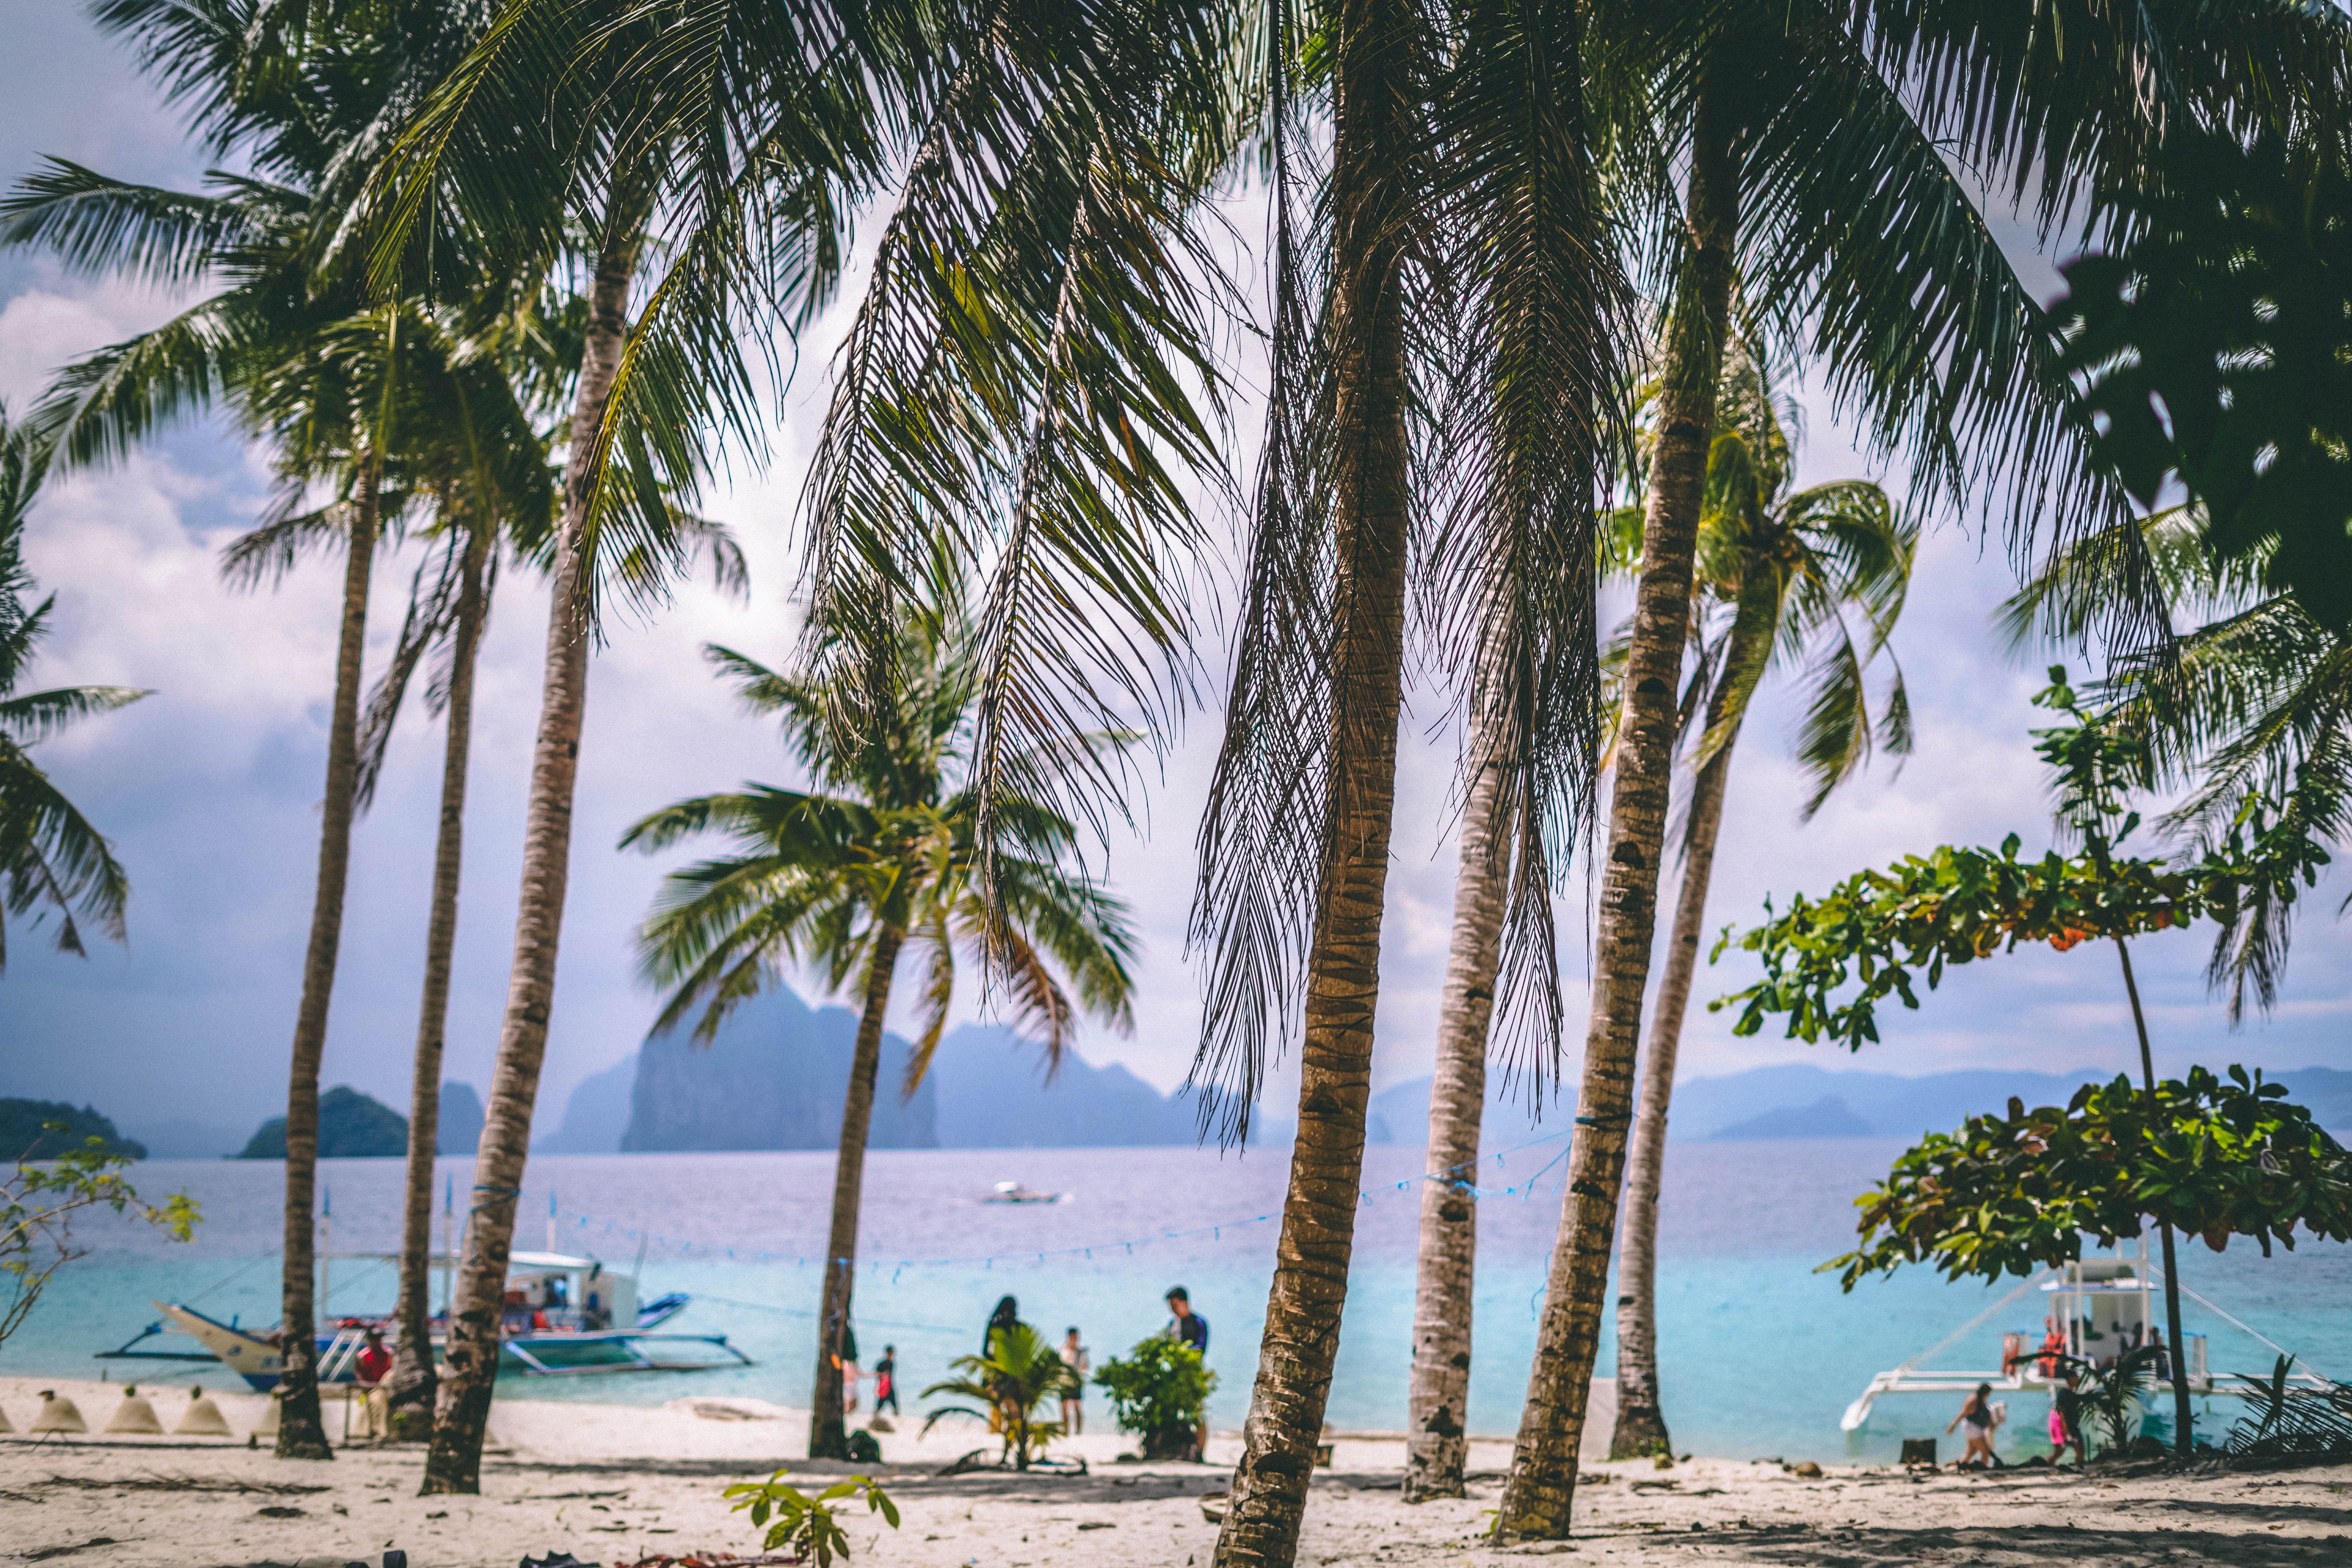 Tall palm trees on a beach with a backdrop of mountains in Palawan, the Philippines